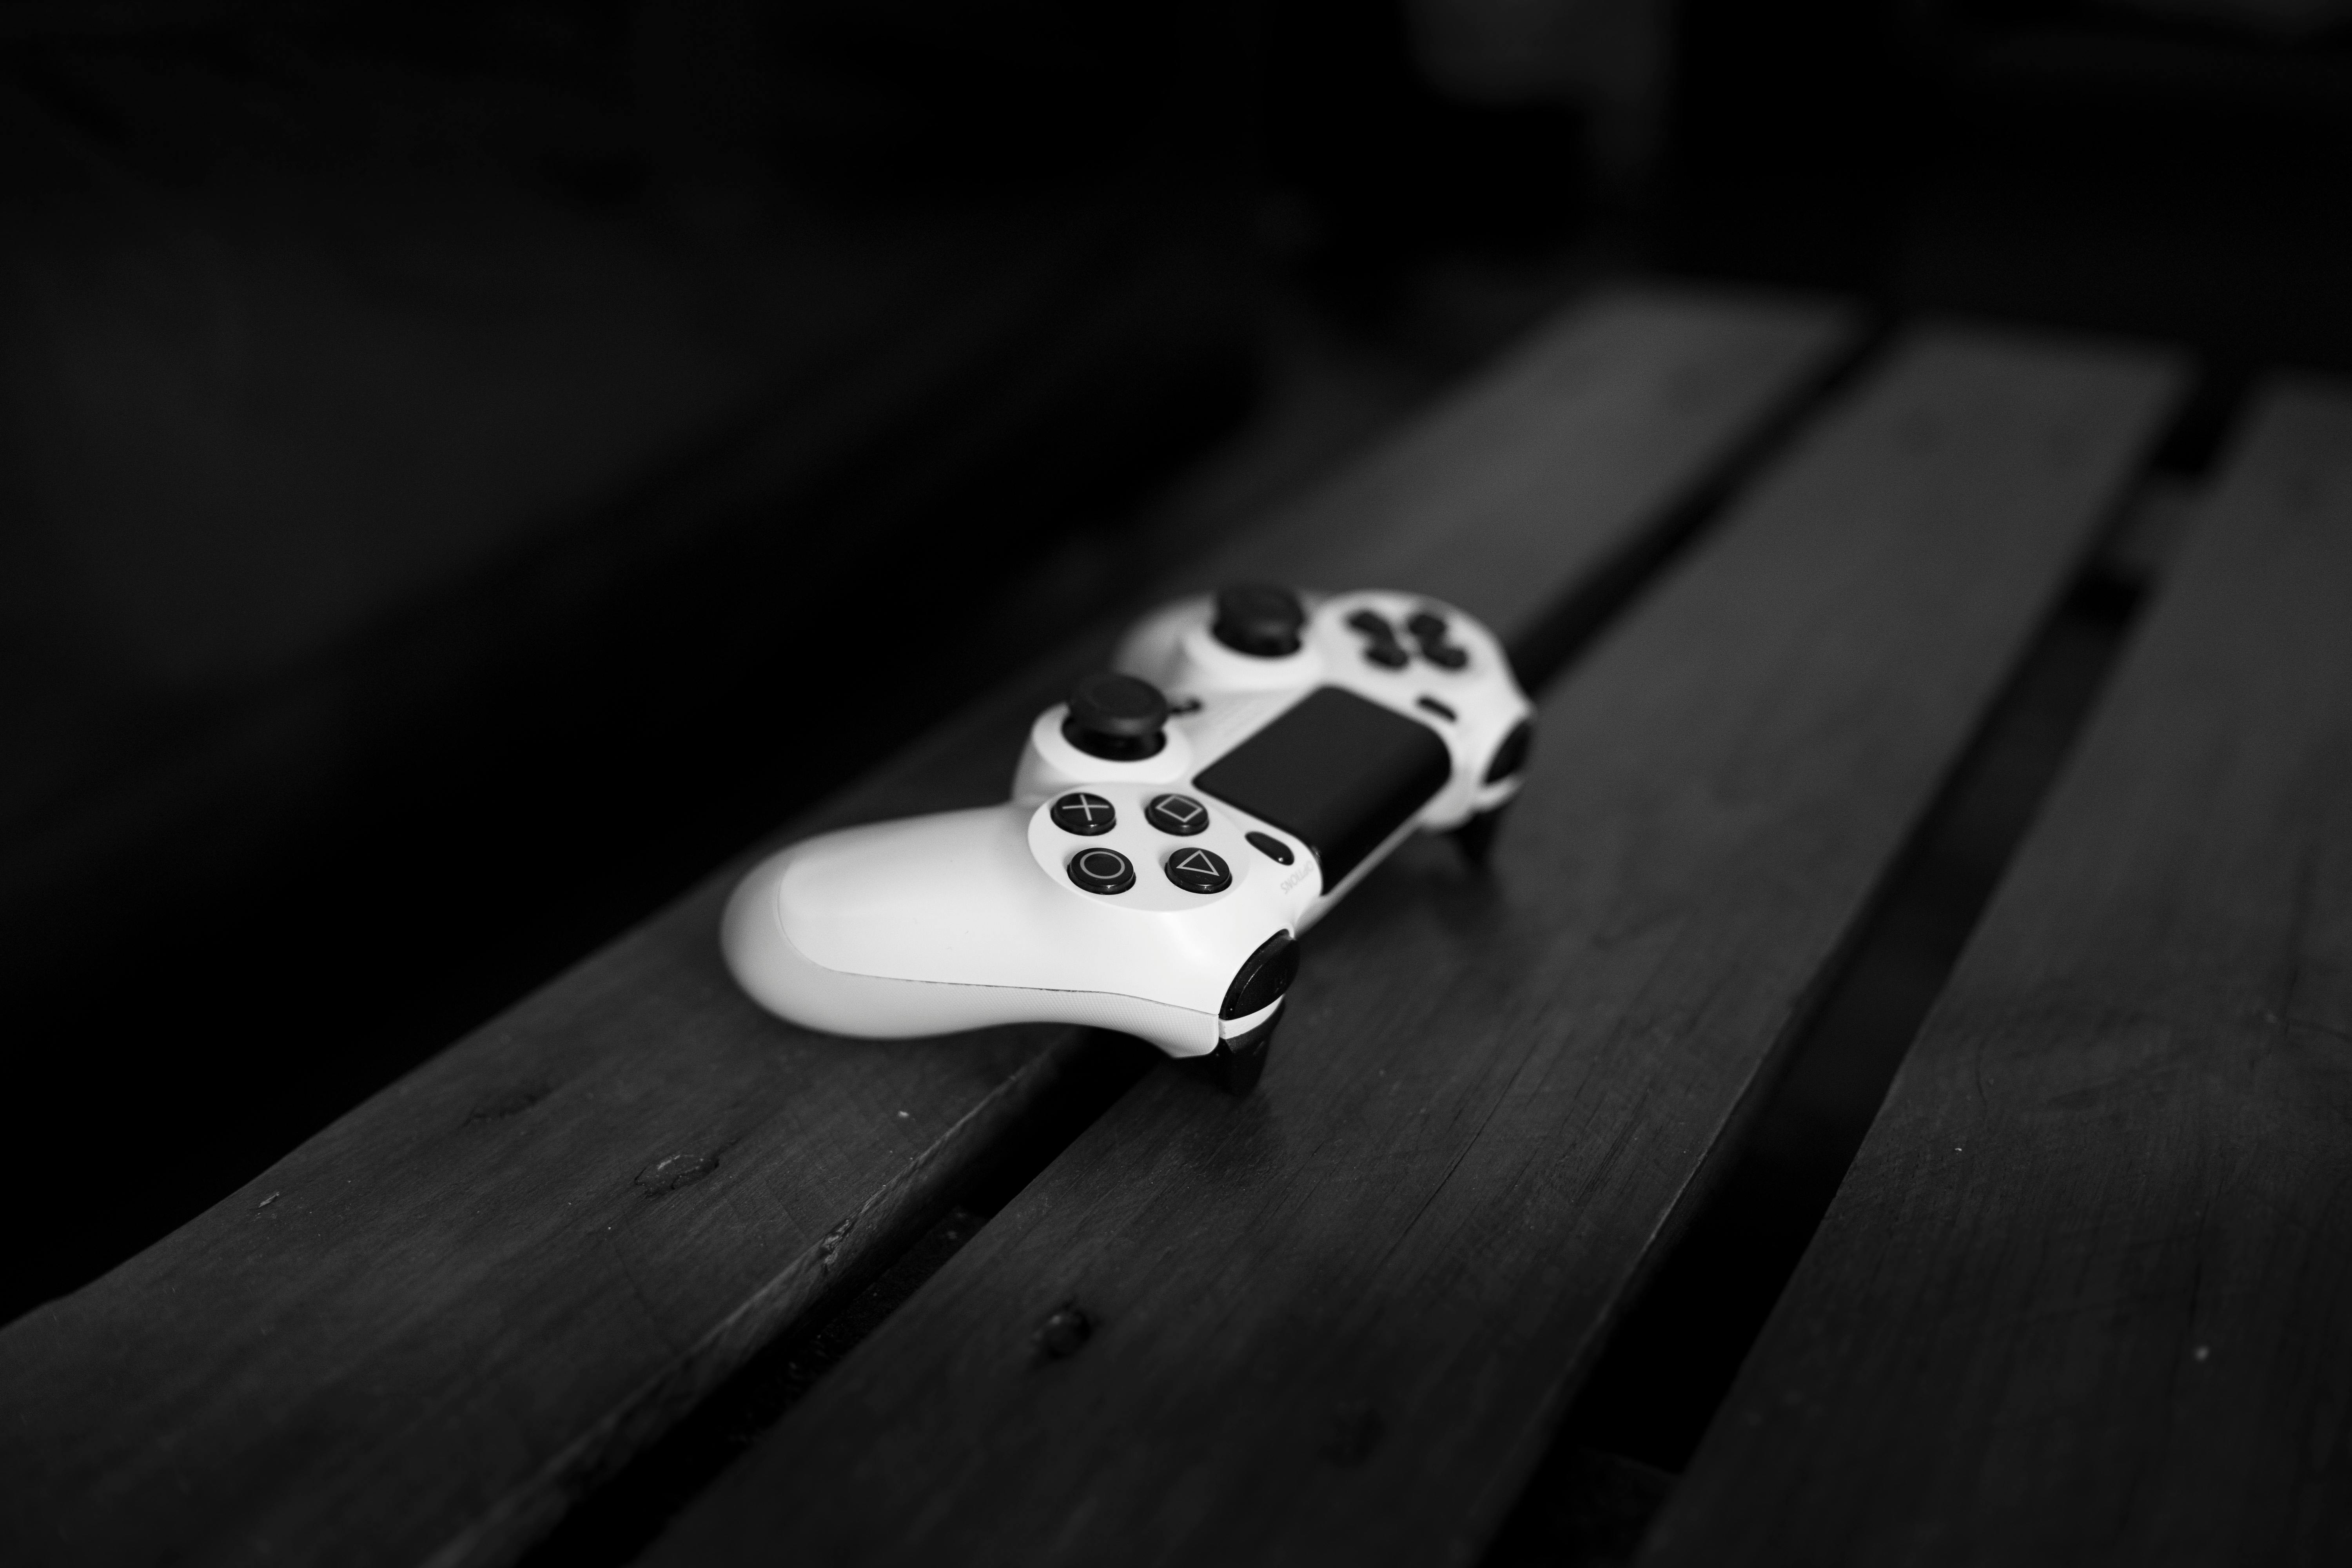 Games 1920x1080 Resolution Wallpapers Laptop Full HD 1080P